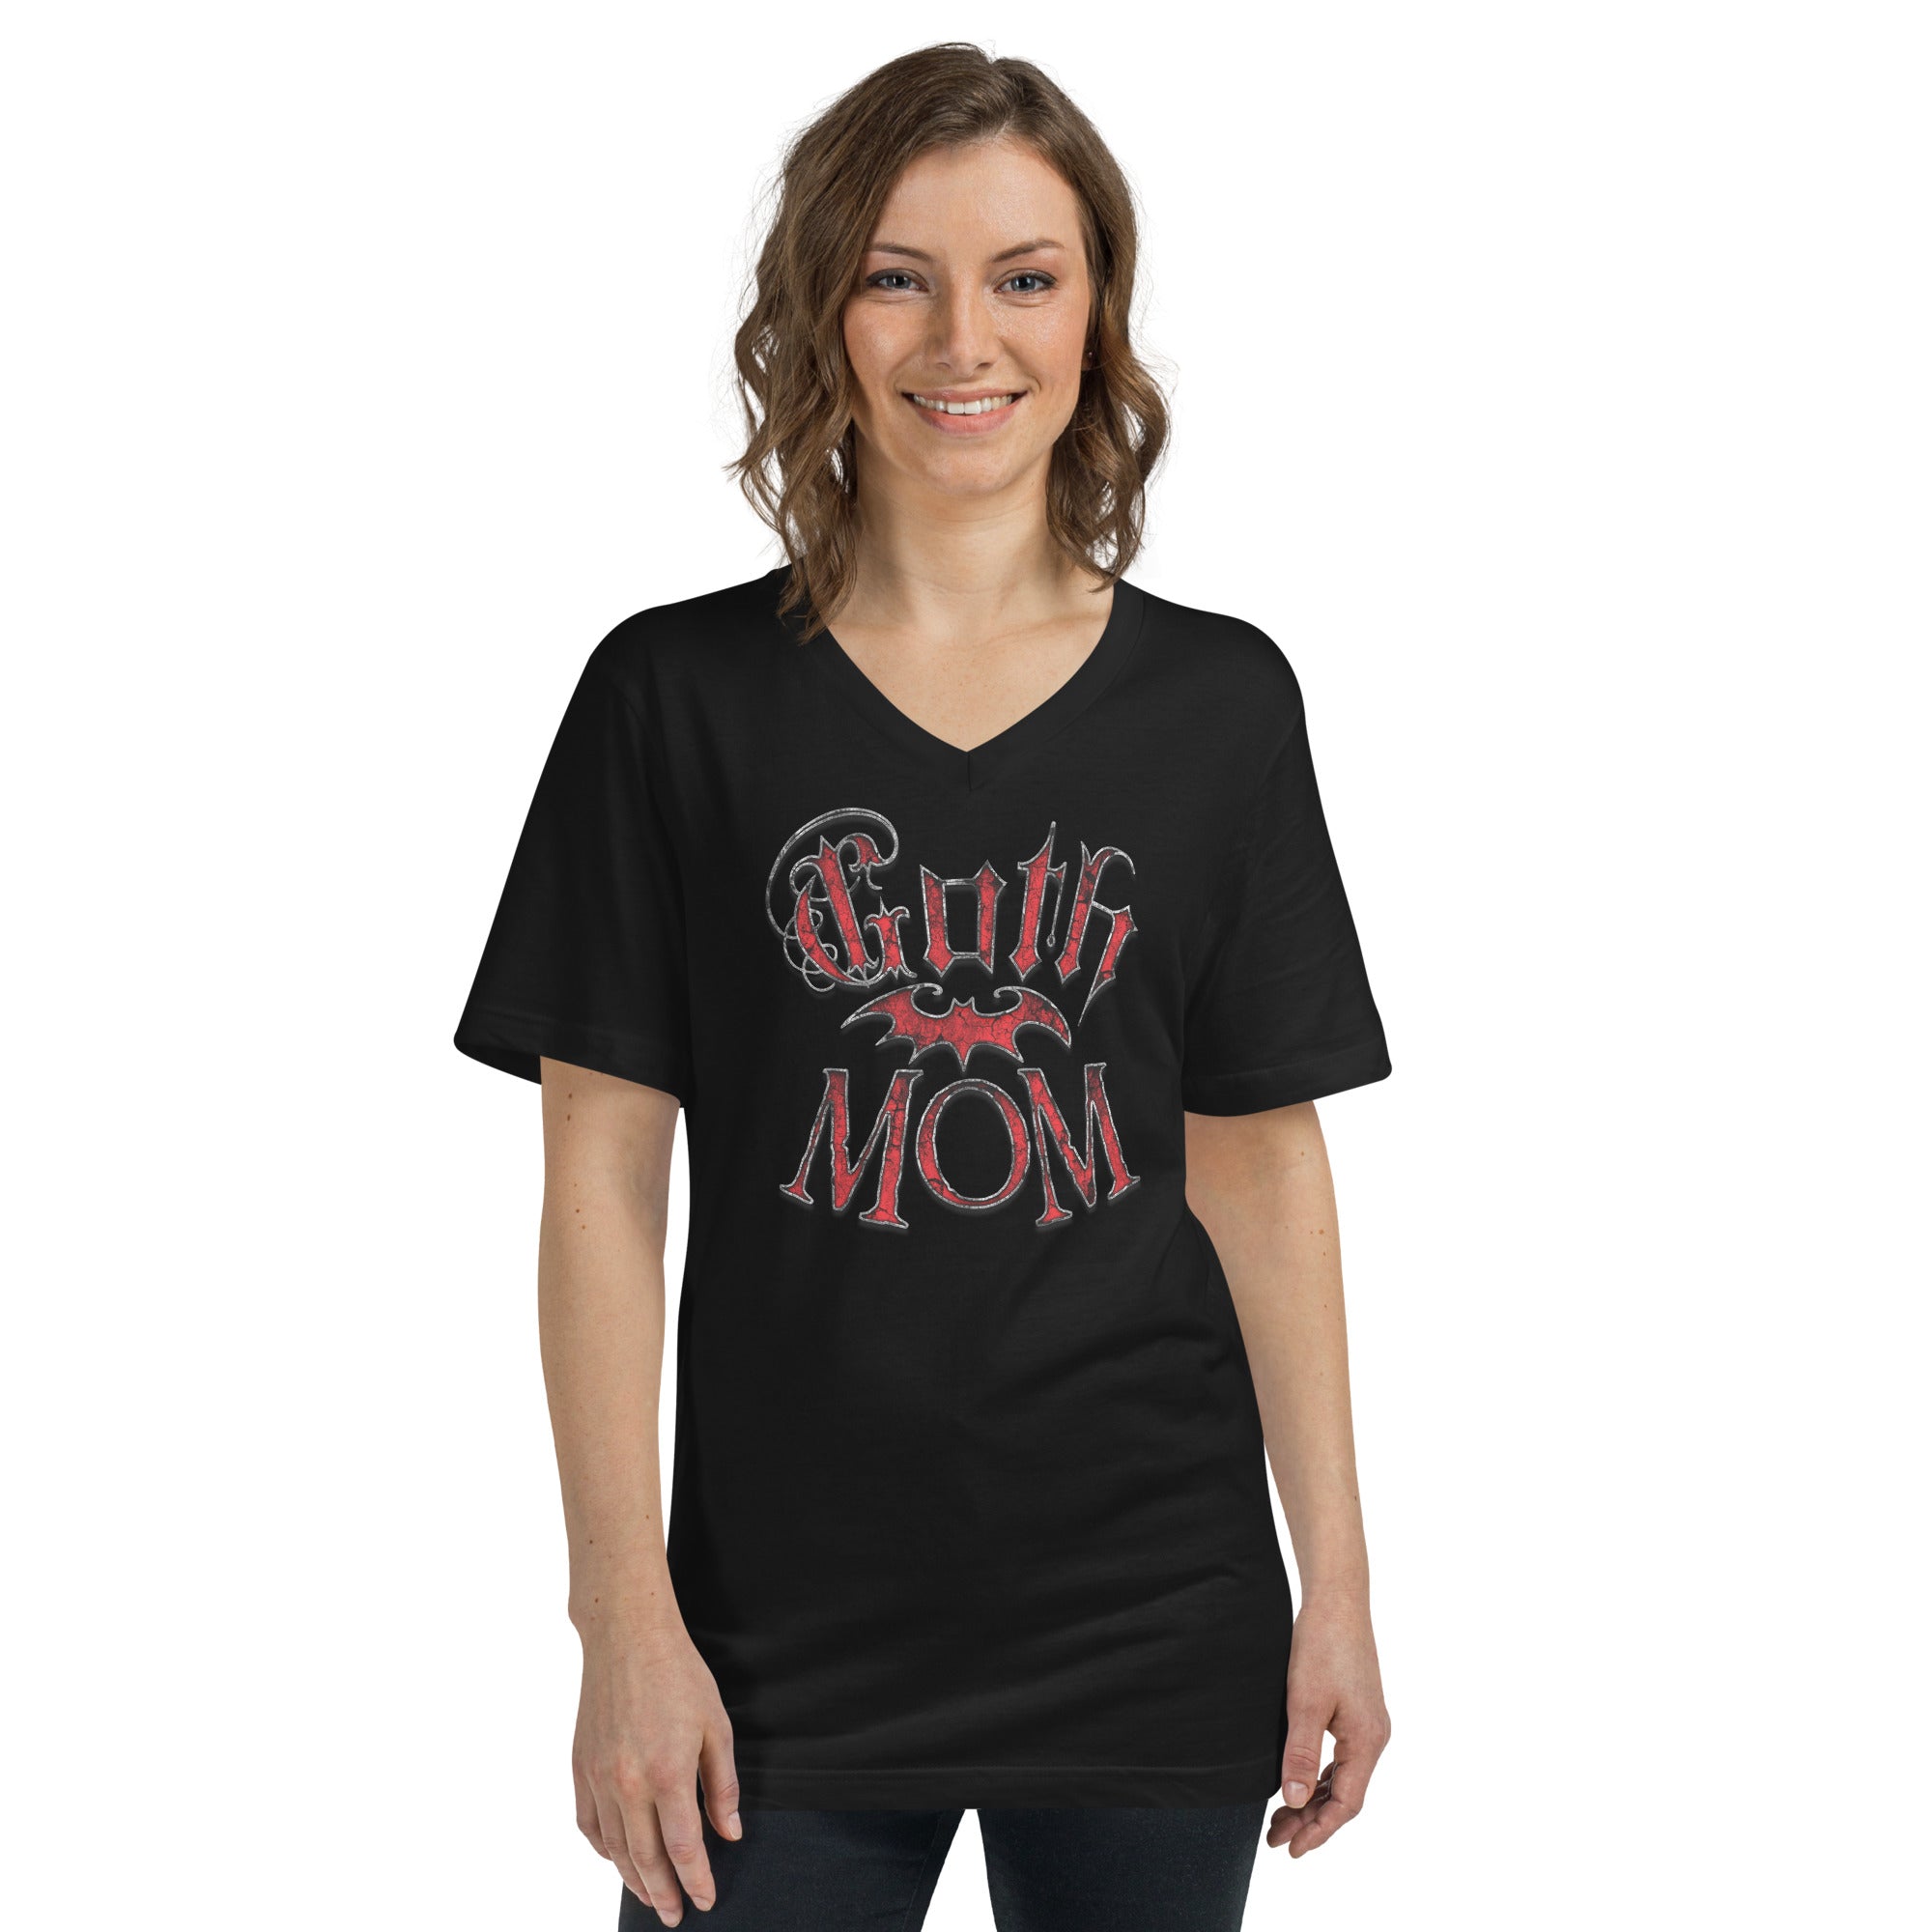 Red Goth Mom with Bat Mother's Day Short Sleeve V-Neck T-Shirt